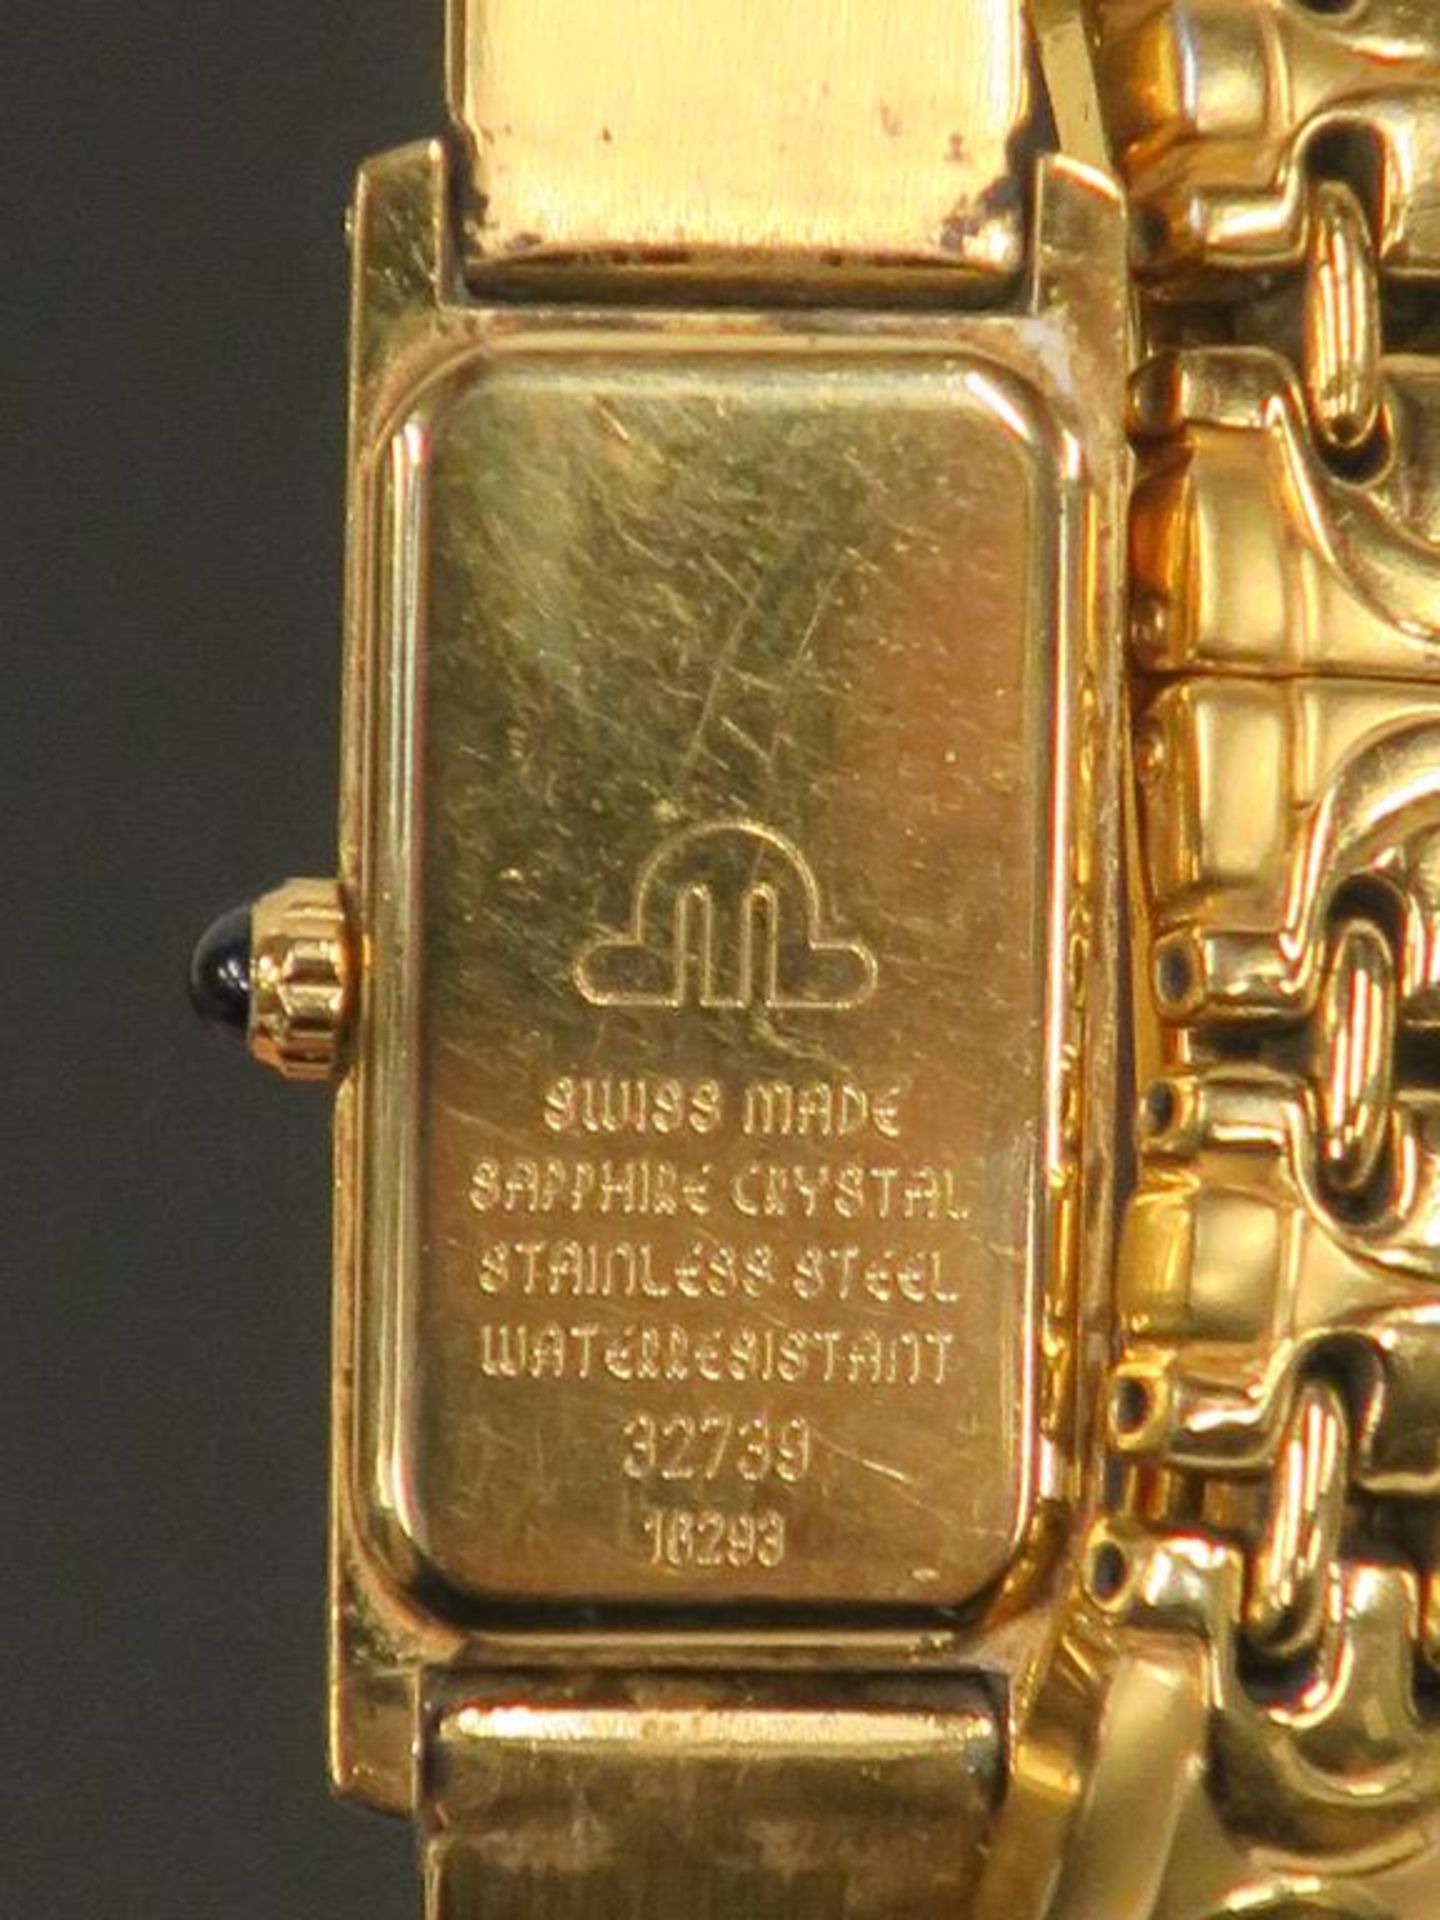 A boxed Maurice Lacroix Swiss made Gold Plated Ladies Watch (est £80-£100) - Image 4 of 4